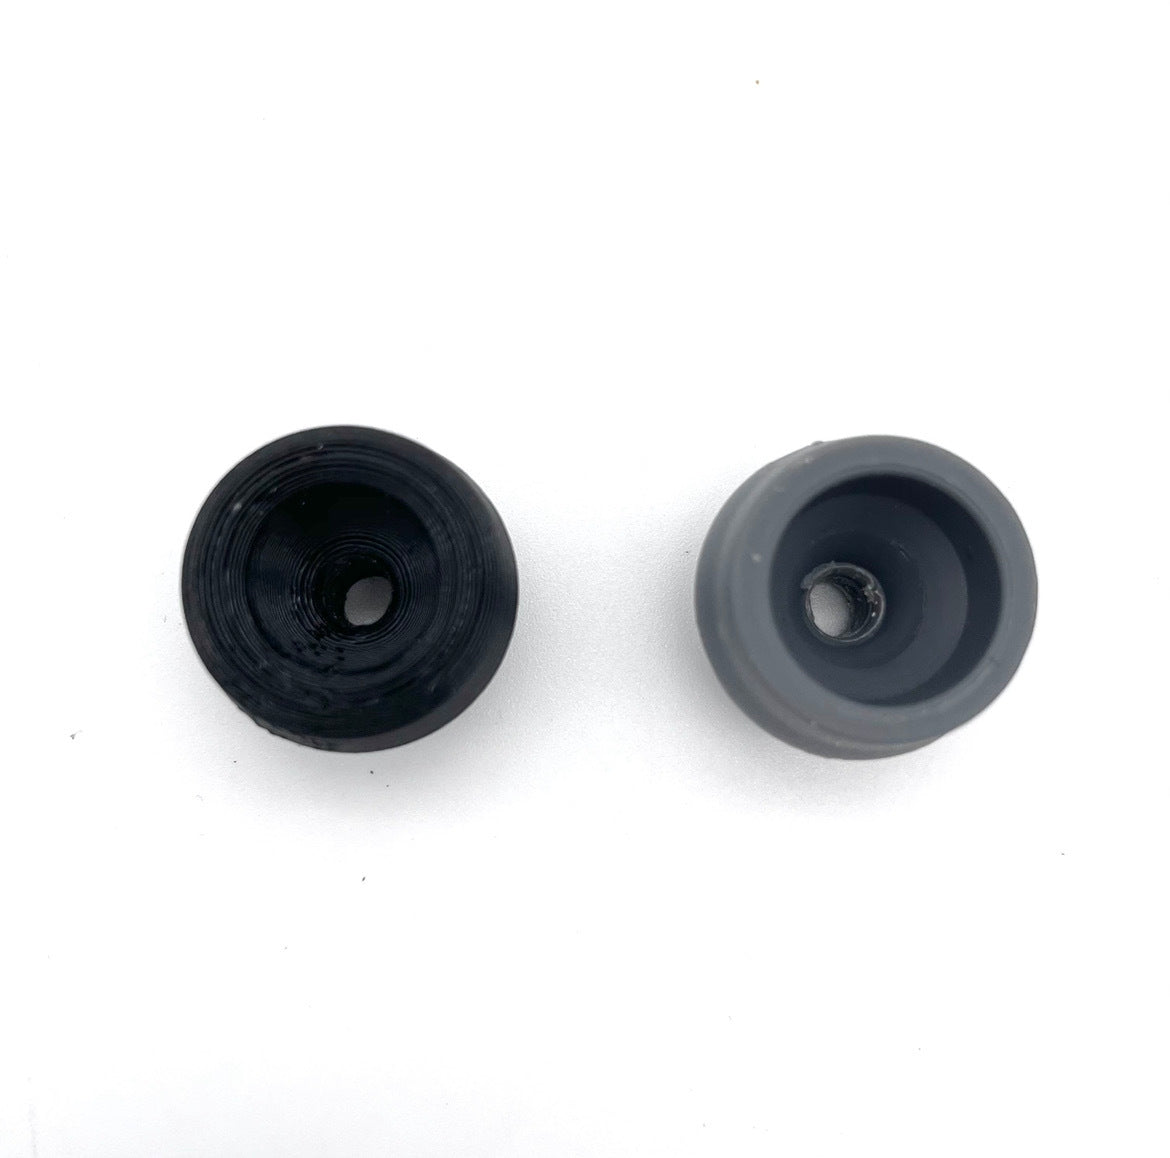 Hawk Helium 20inch Replacement Buttons - Extra Strong! (8 Pack)